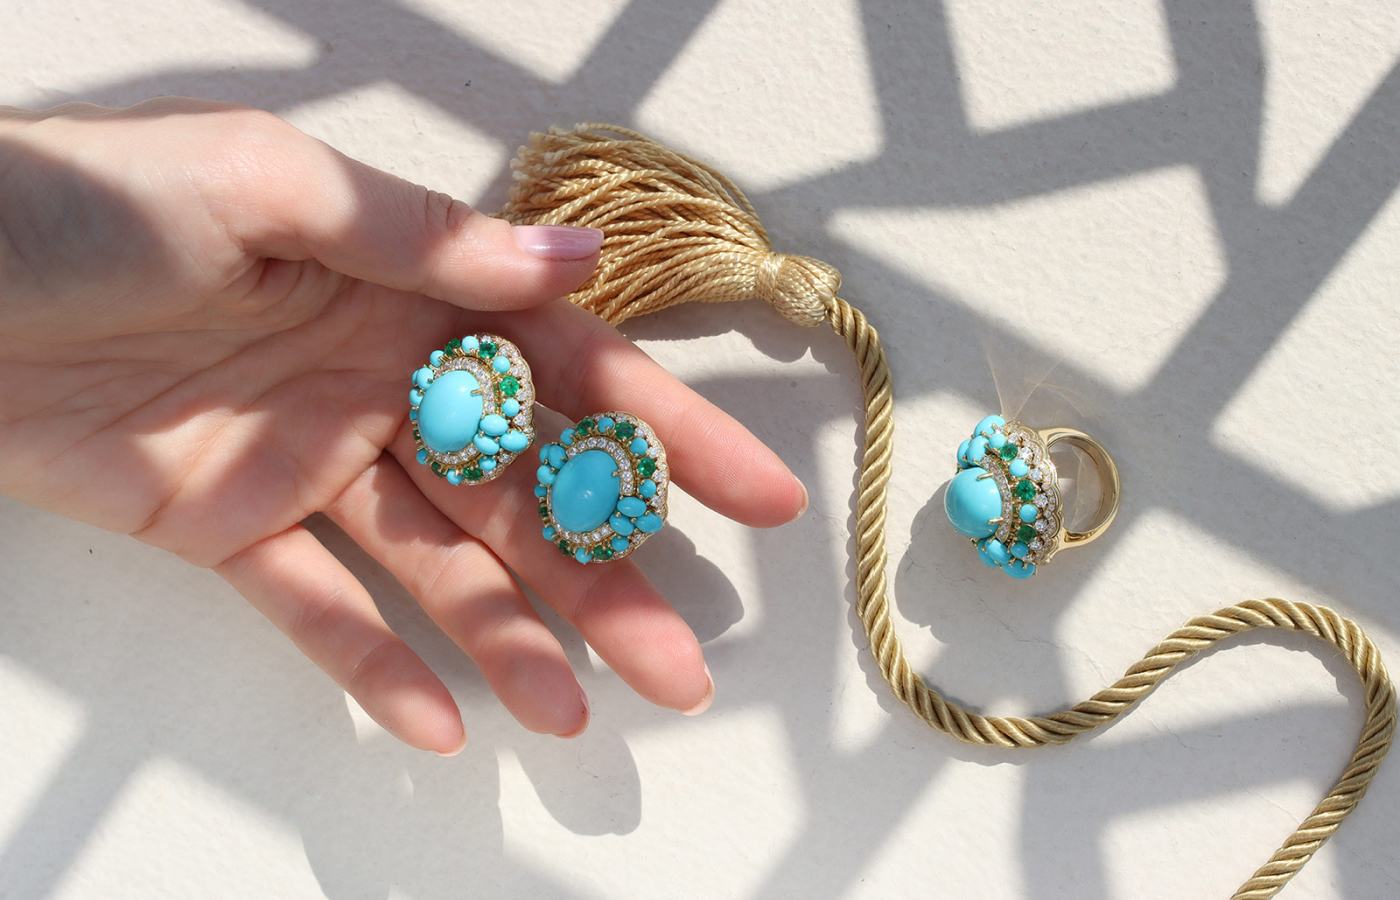 A pair of turquoise, emerald and diamond earrings in 18k yellow gold by Veschetti with a matching cocktail ring